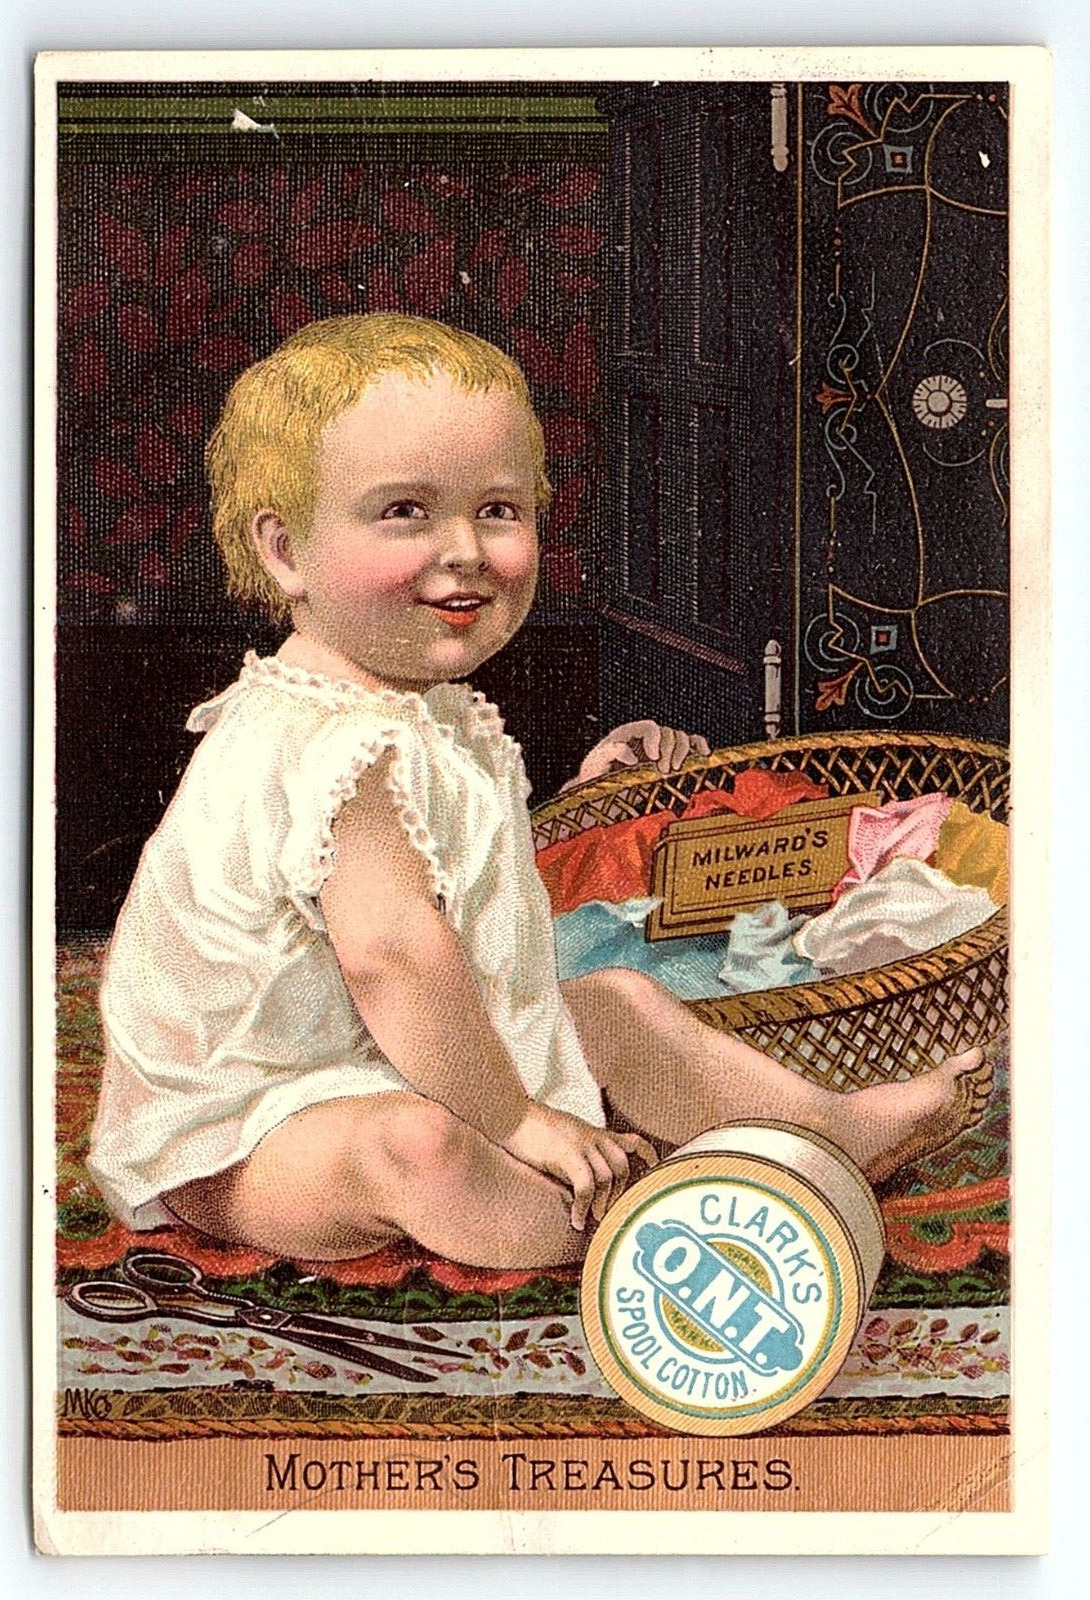 CLARK\'S O.N.T. SPOOL COTTON SMILING BABY MOTHER\'S TREASURES TRADE CARD P1981